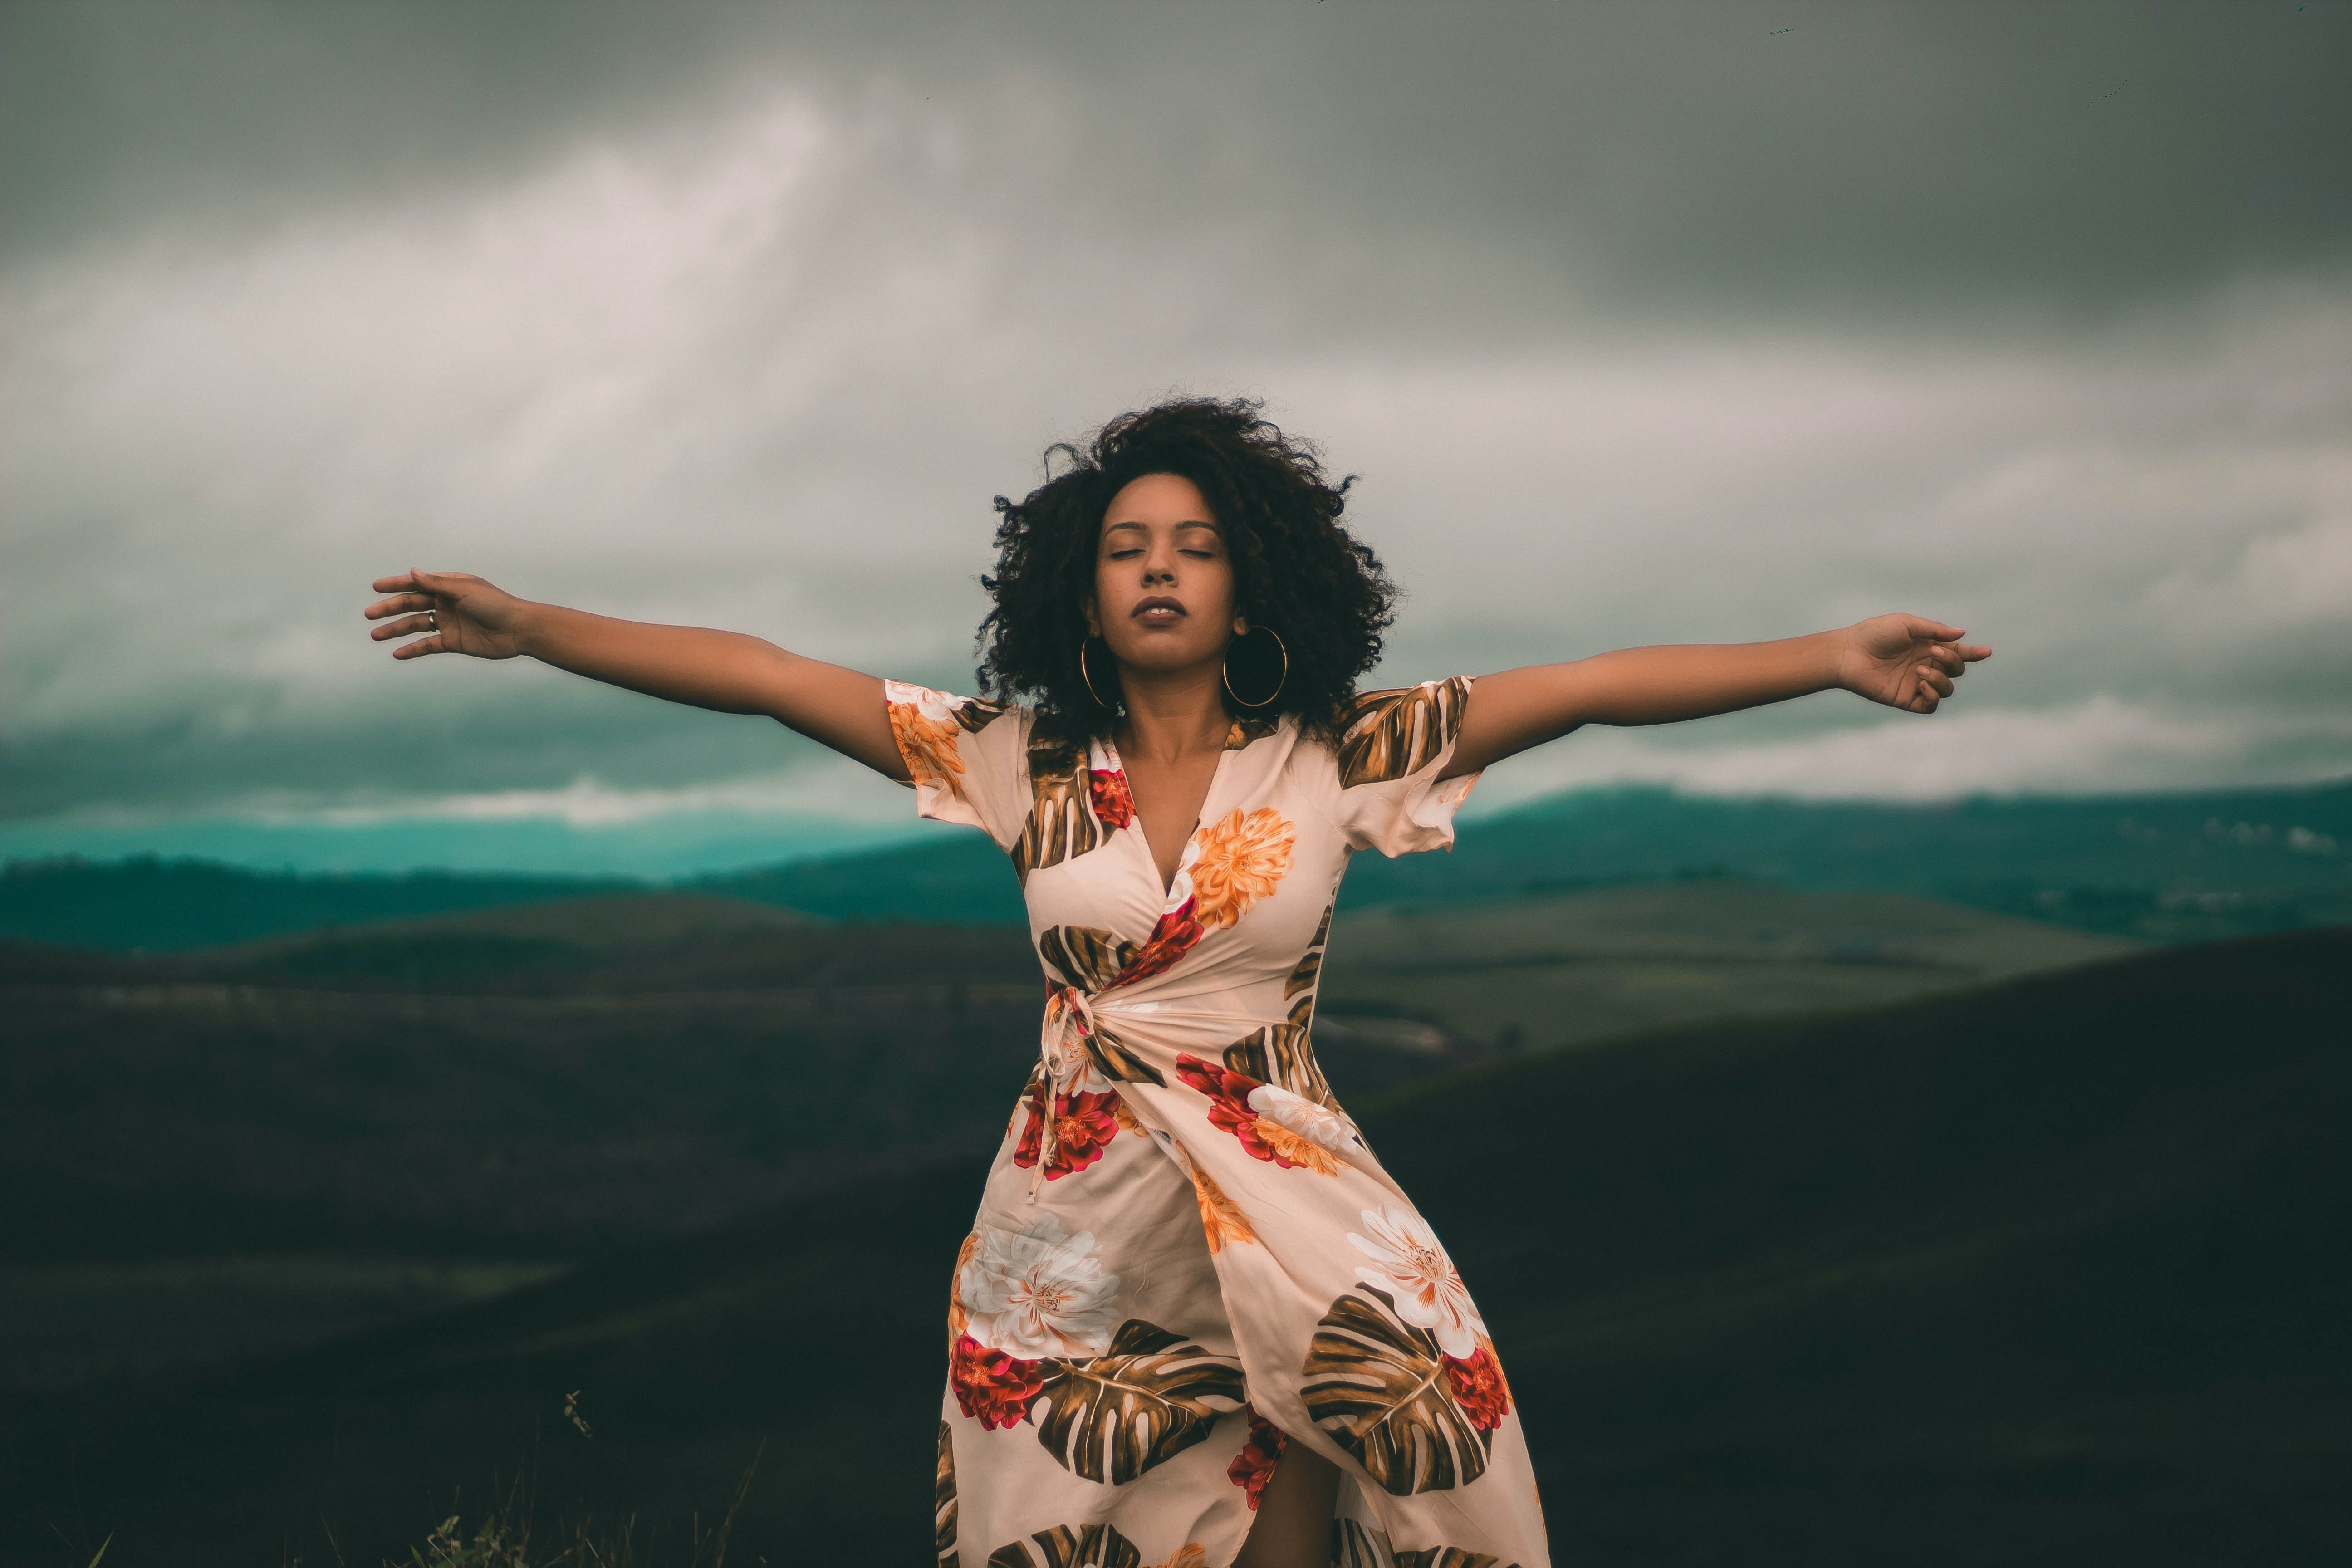 A woman with her eyes closed and her arms wide open. | Source: Pexels.